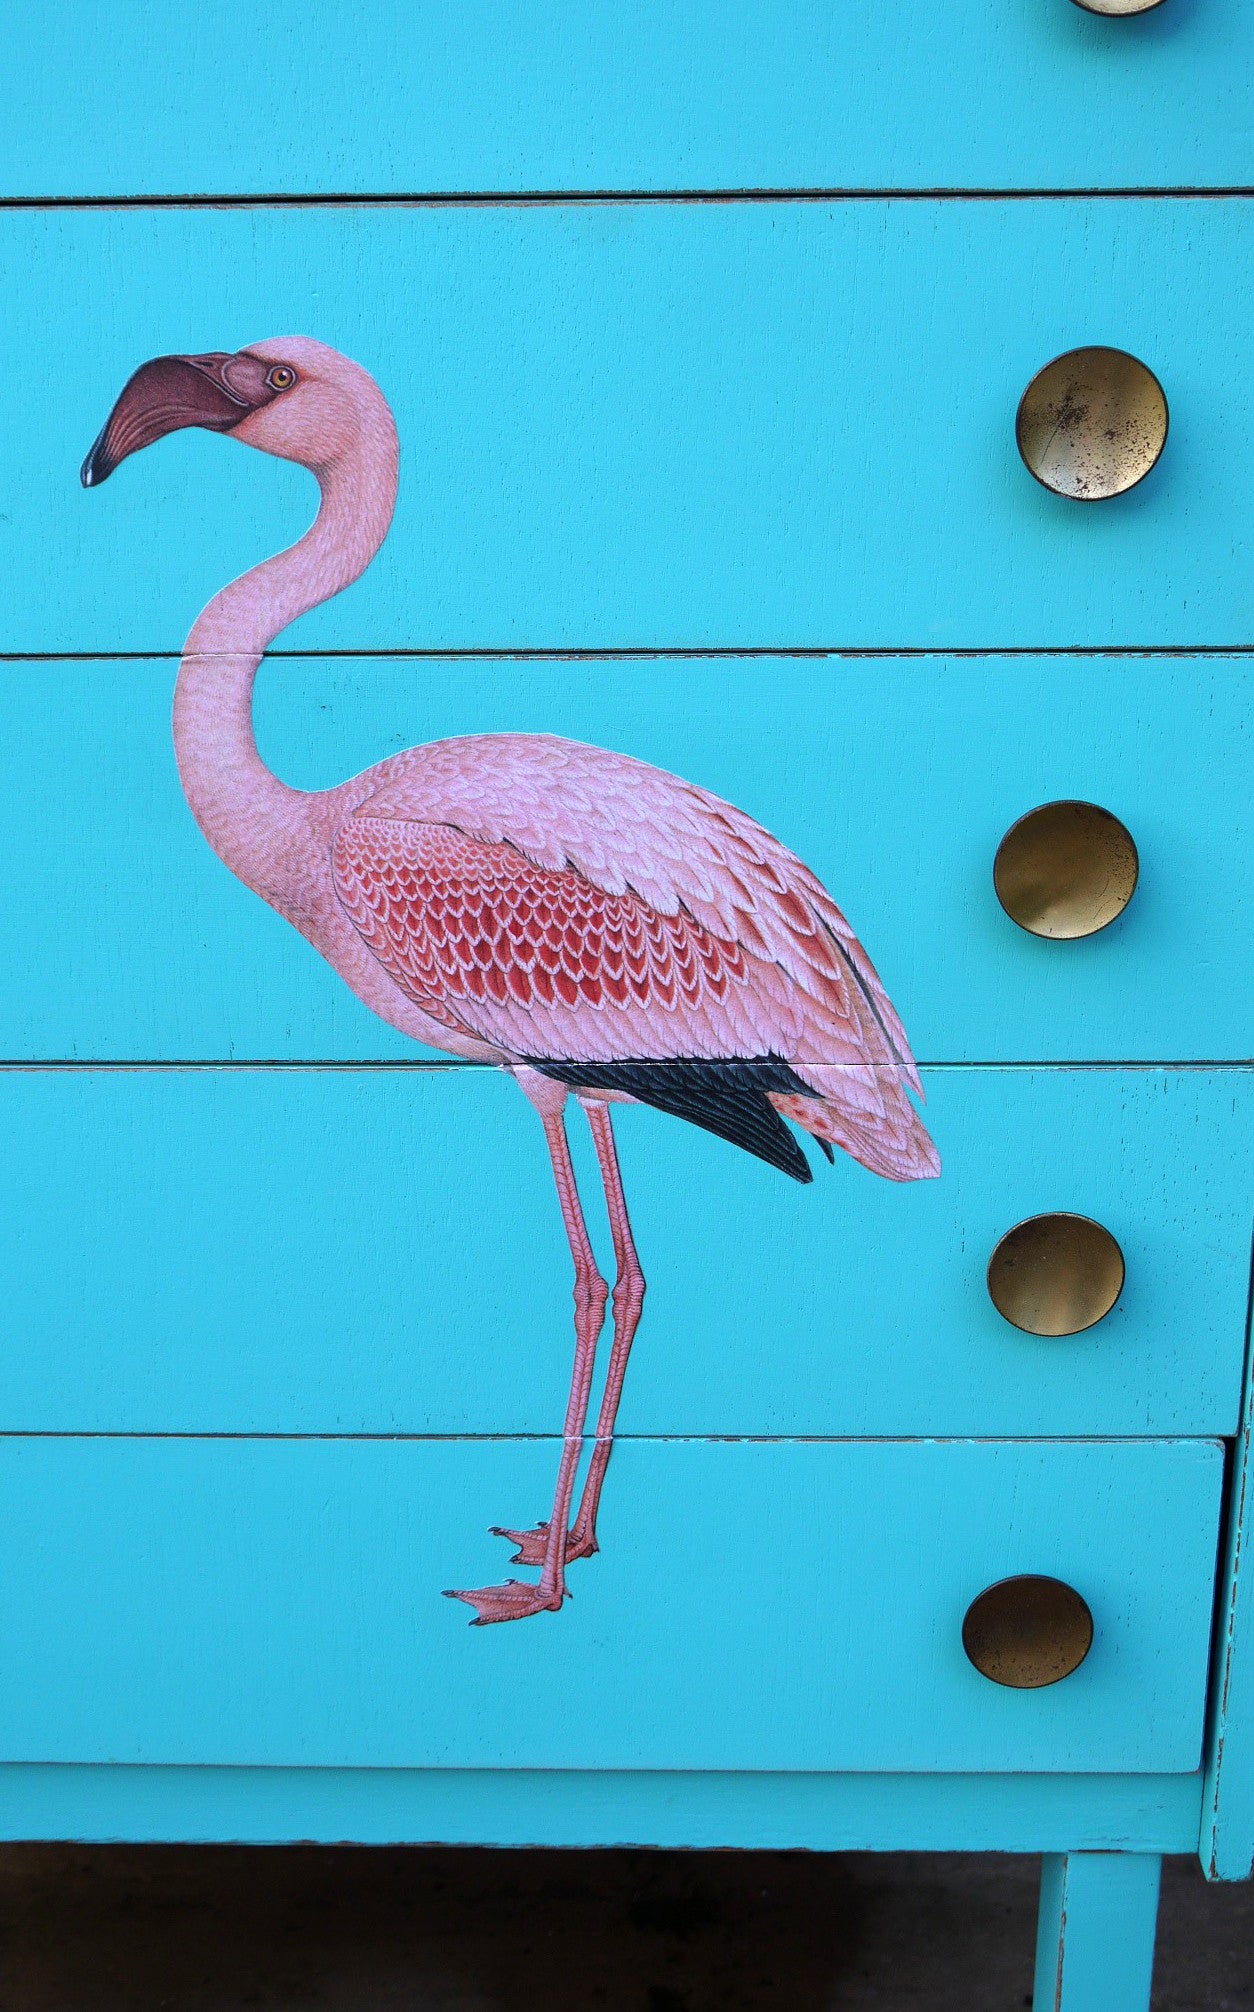 Vintage mid century children's chest of drawers painted in azure blue with pink flamingo design